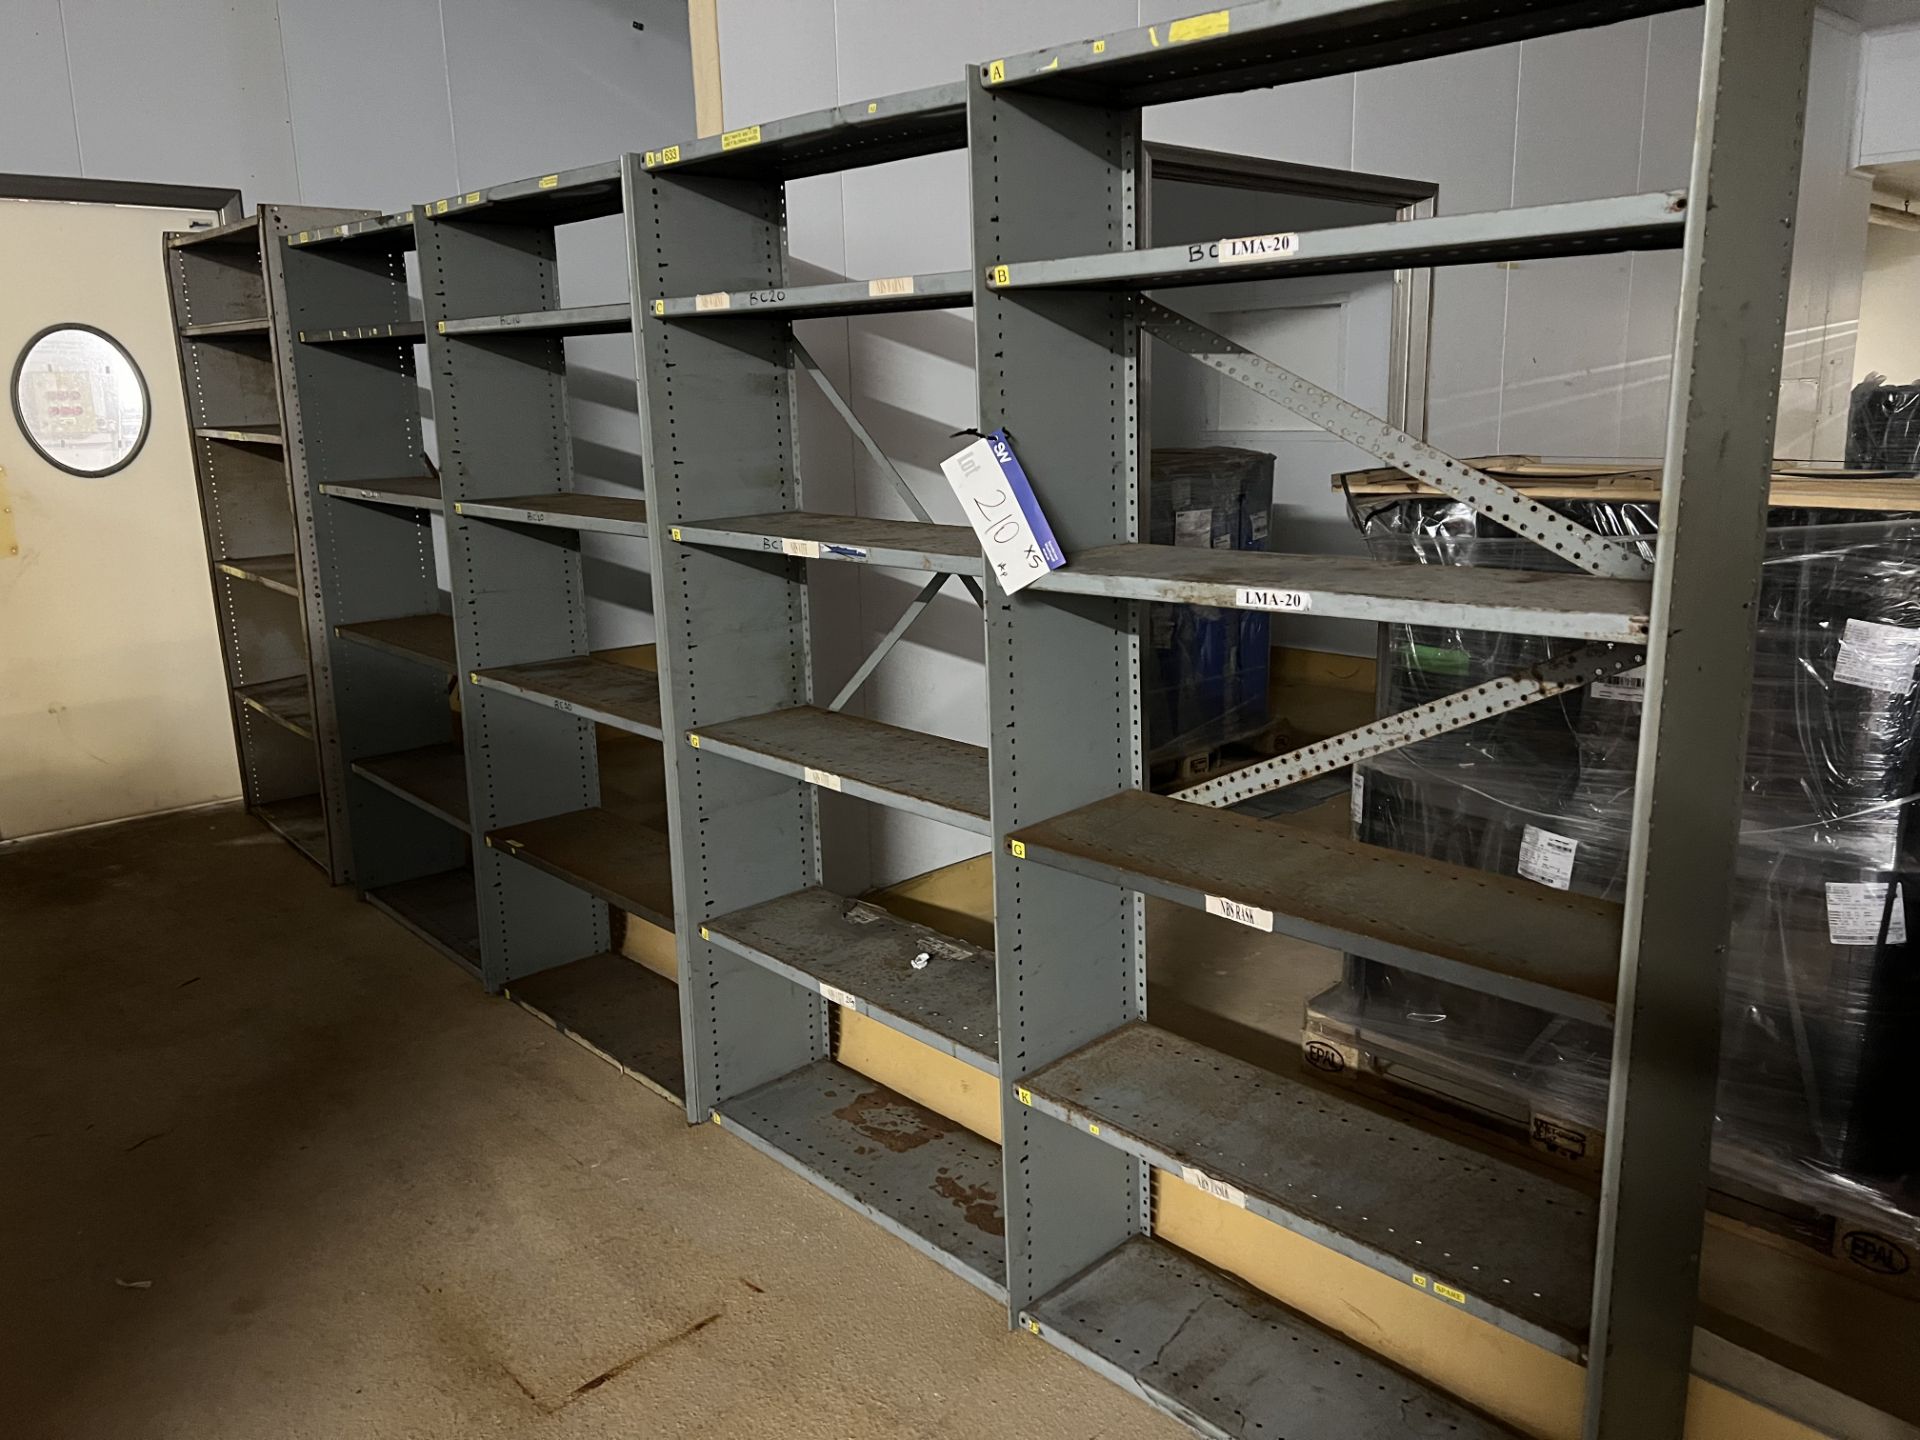 Five Sets of Five Shelf Racking, each set measures approx. 0.92m x 0.33m x 1.9m high, lift out